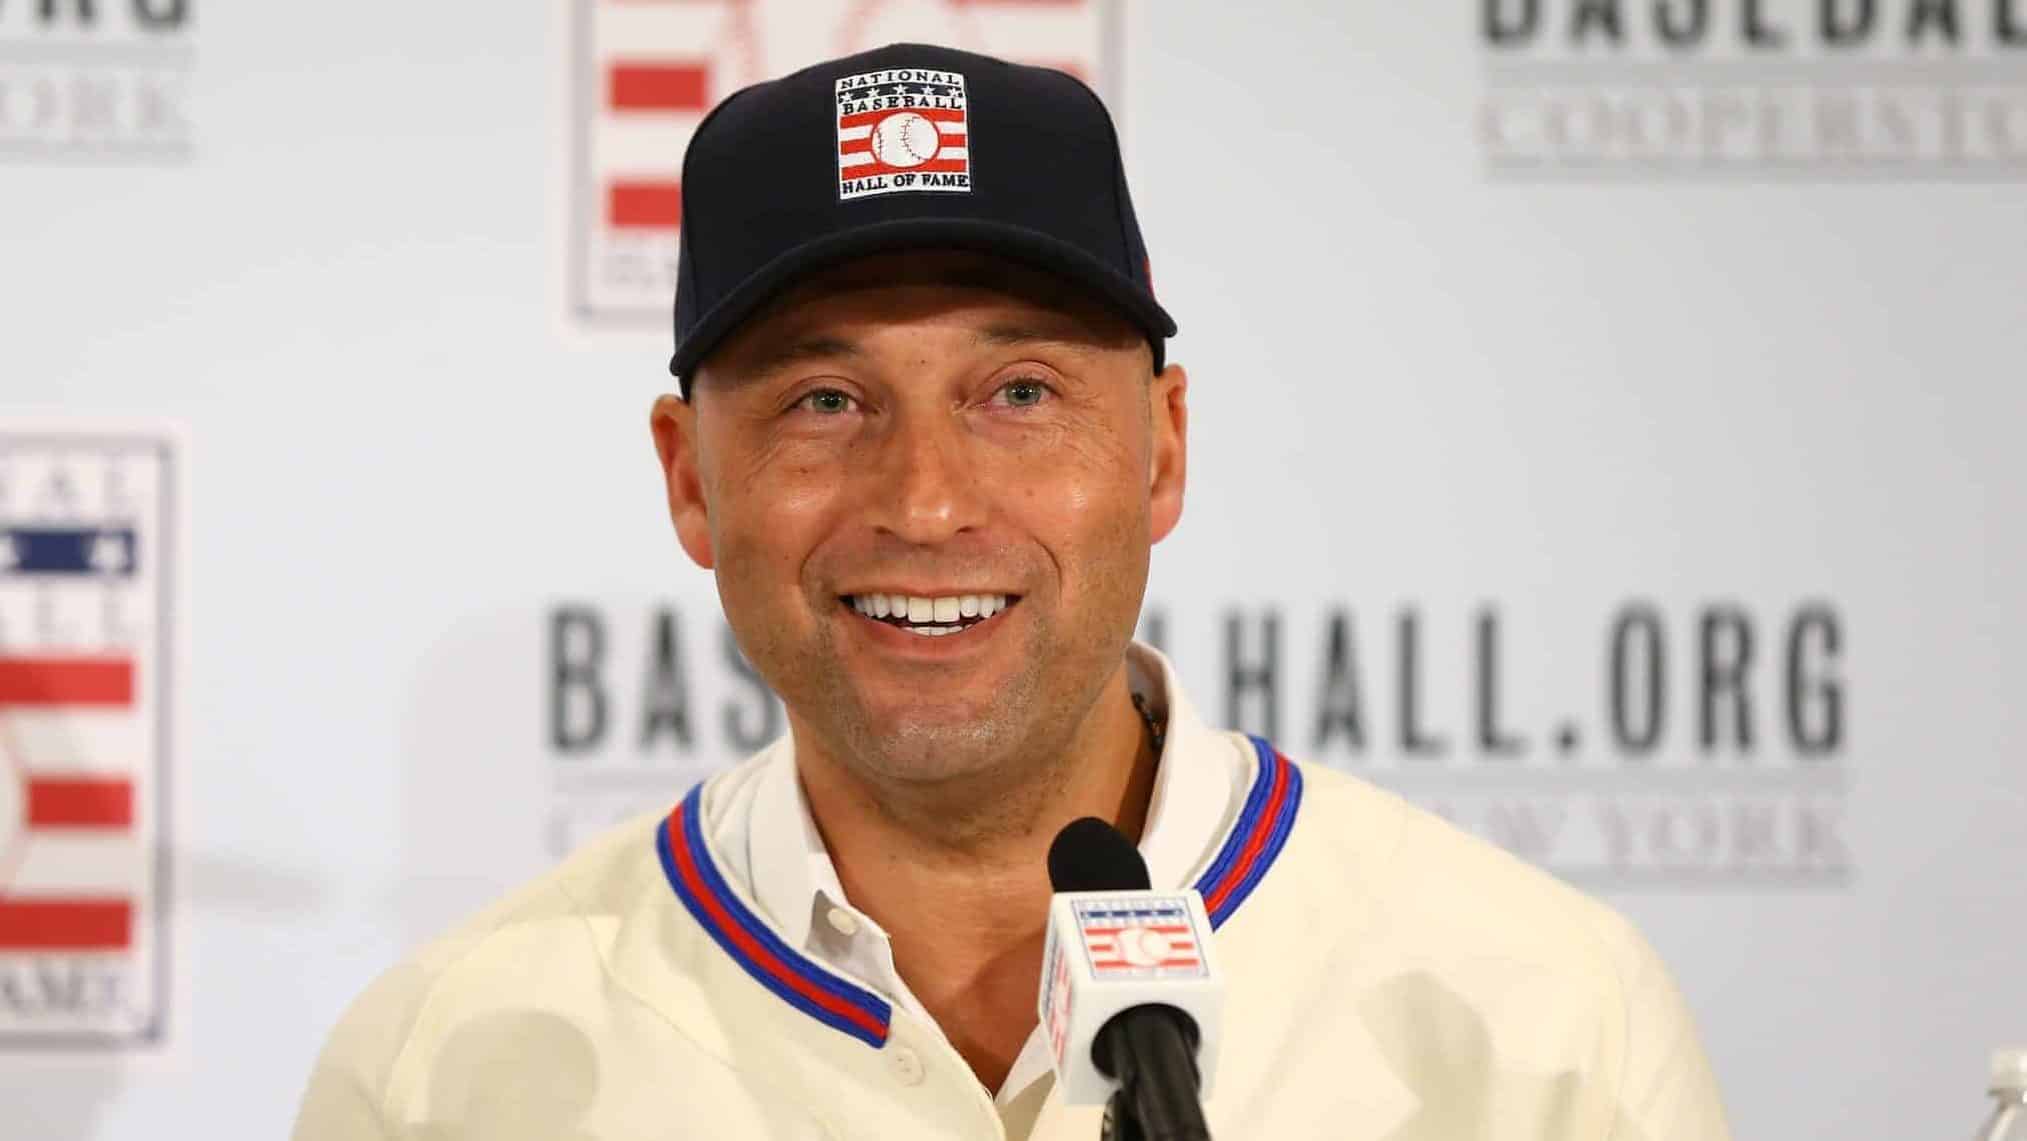 NEW YORK, NEW YORK - JANUARY 22: Derek Jeter speaks to the media after being elected into the National Baseball Hall of Fame Class of 2020 on January 22, 2020 at the St. Regis Hotel in New York City. The National Baseball Hall of Fame induction ceremony will be held on Sunday, July 26, 2020 in Cooperstown, NY.